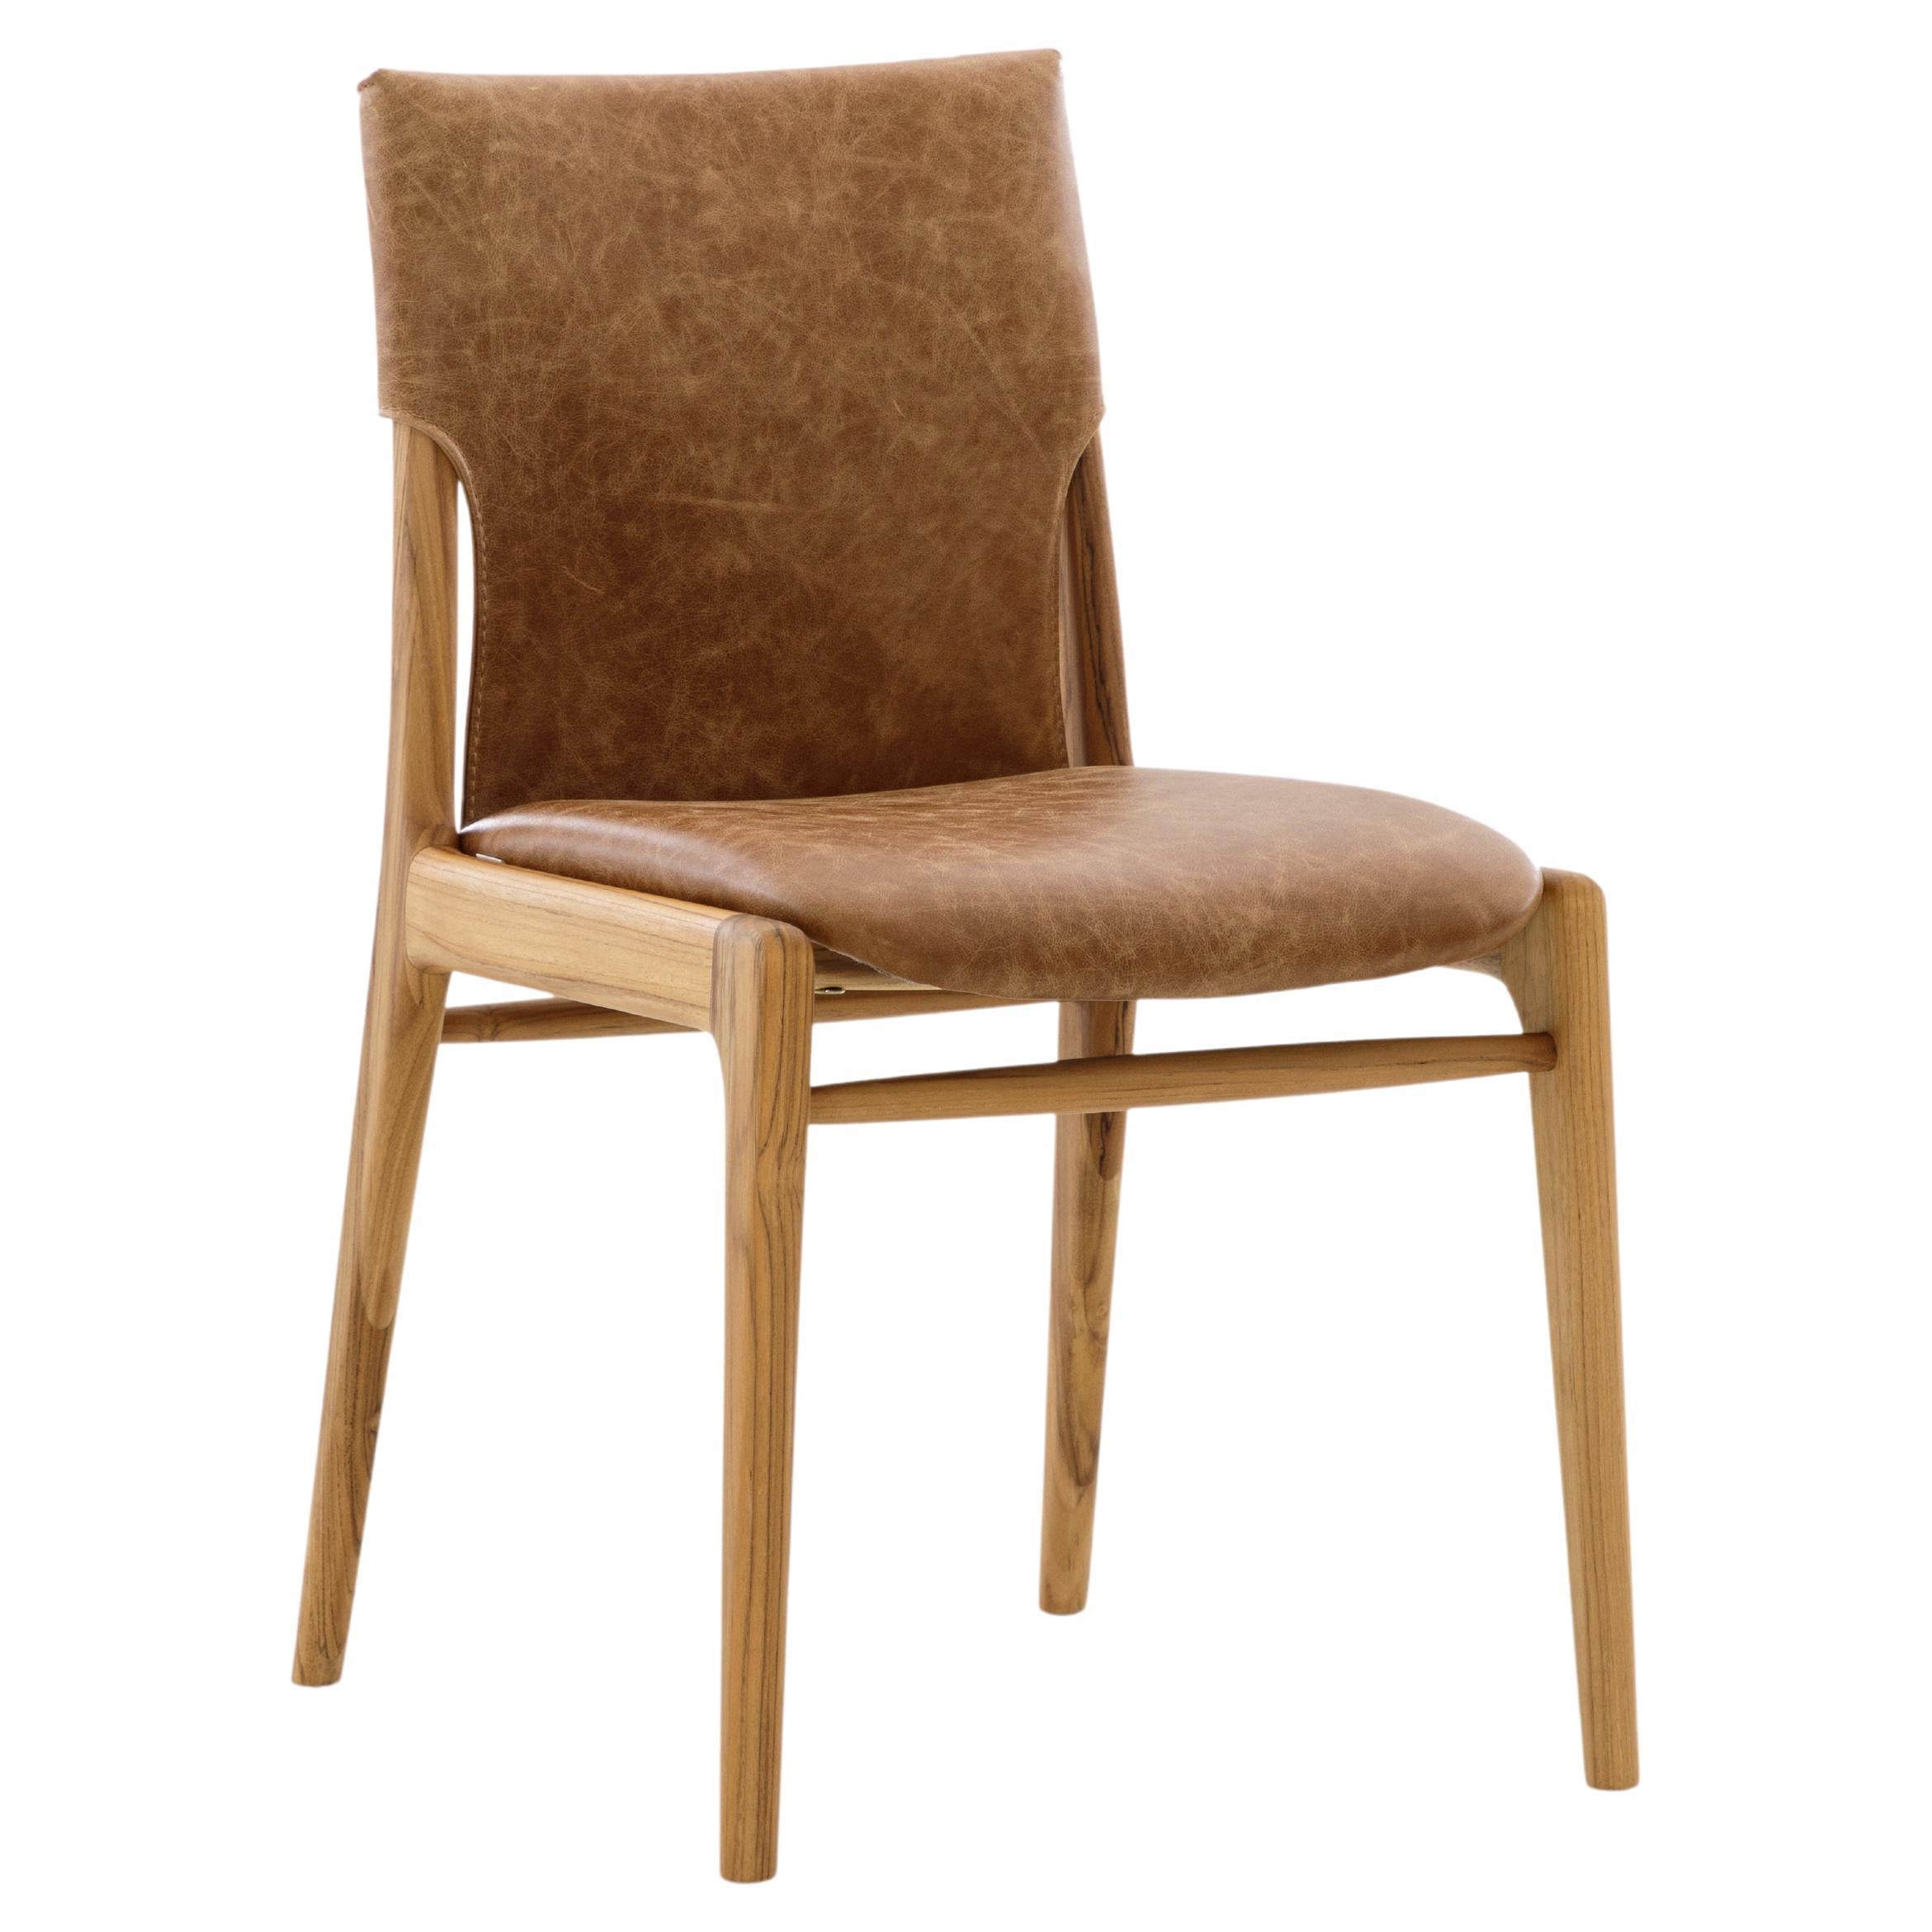 Tress Brown Leather Upholstered Dining Chair in Teak Wood Finish, Set of 2 For Sale